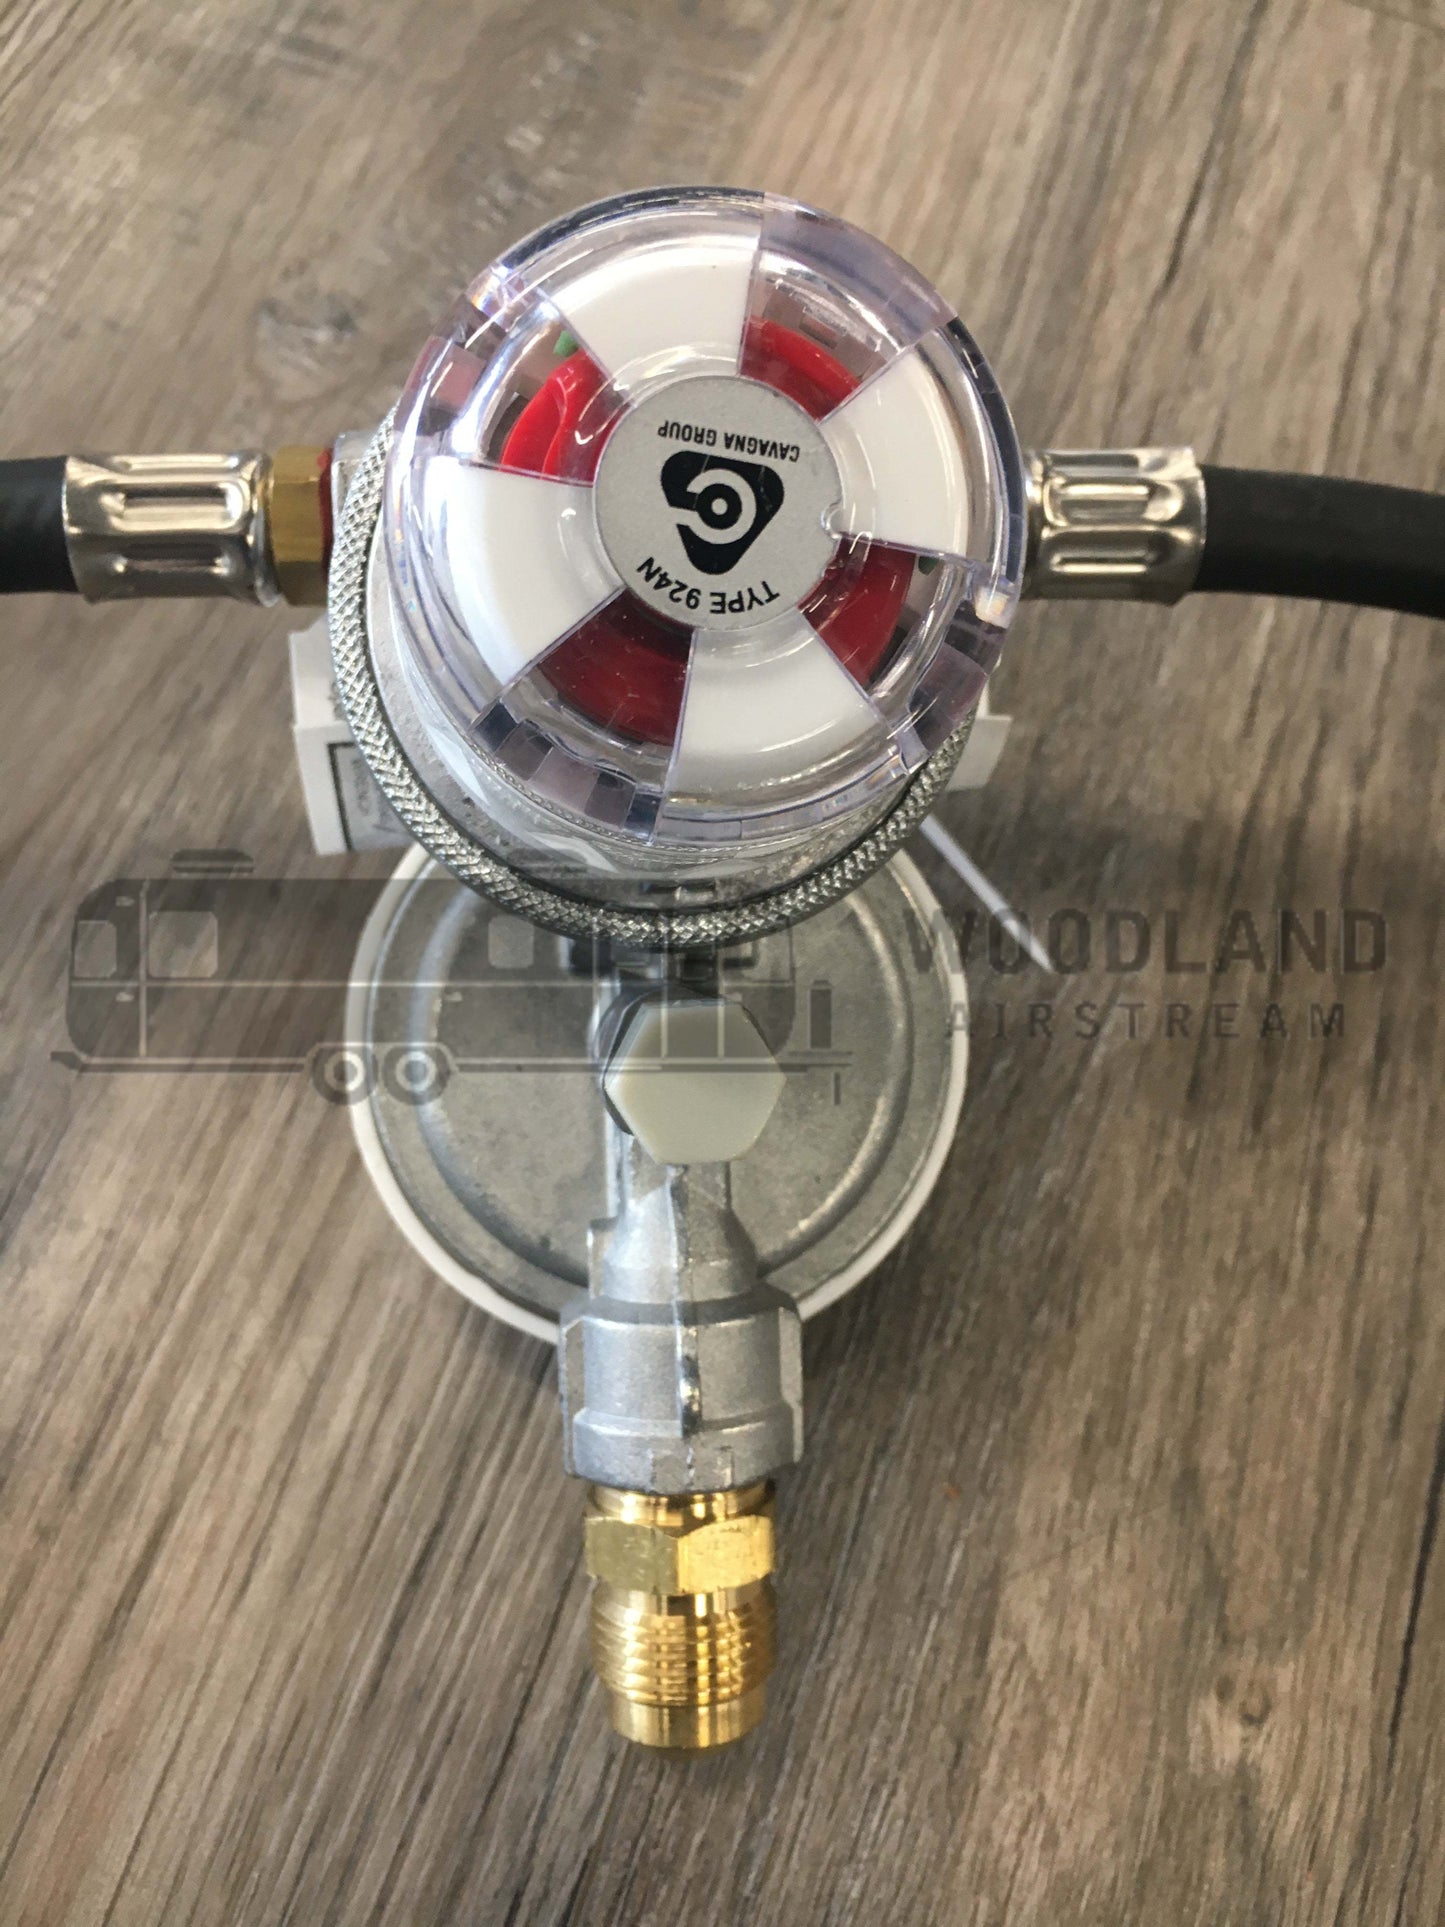 Airstream LPG Propane Gas Regulator with 11" Pigtails - 602332-09